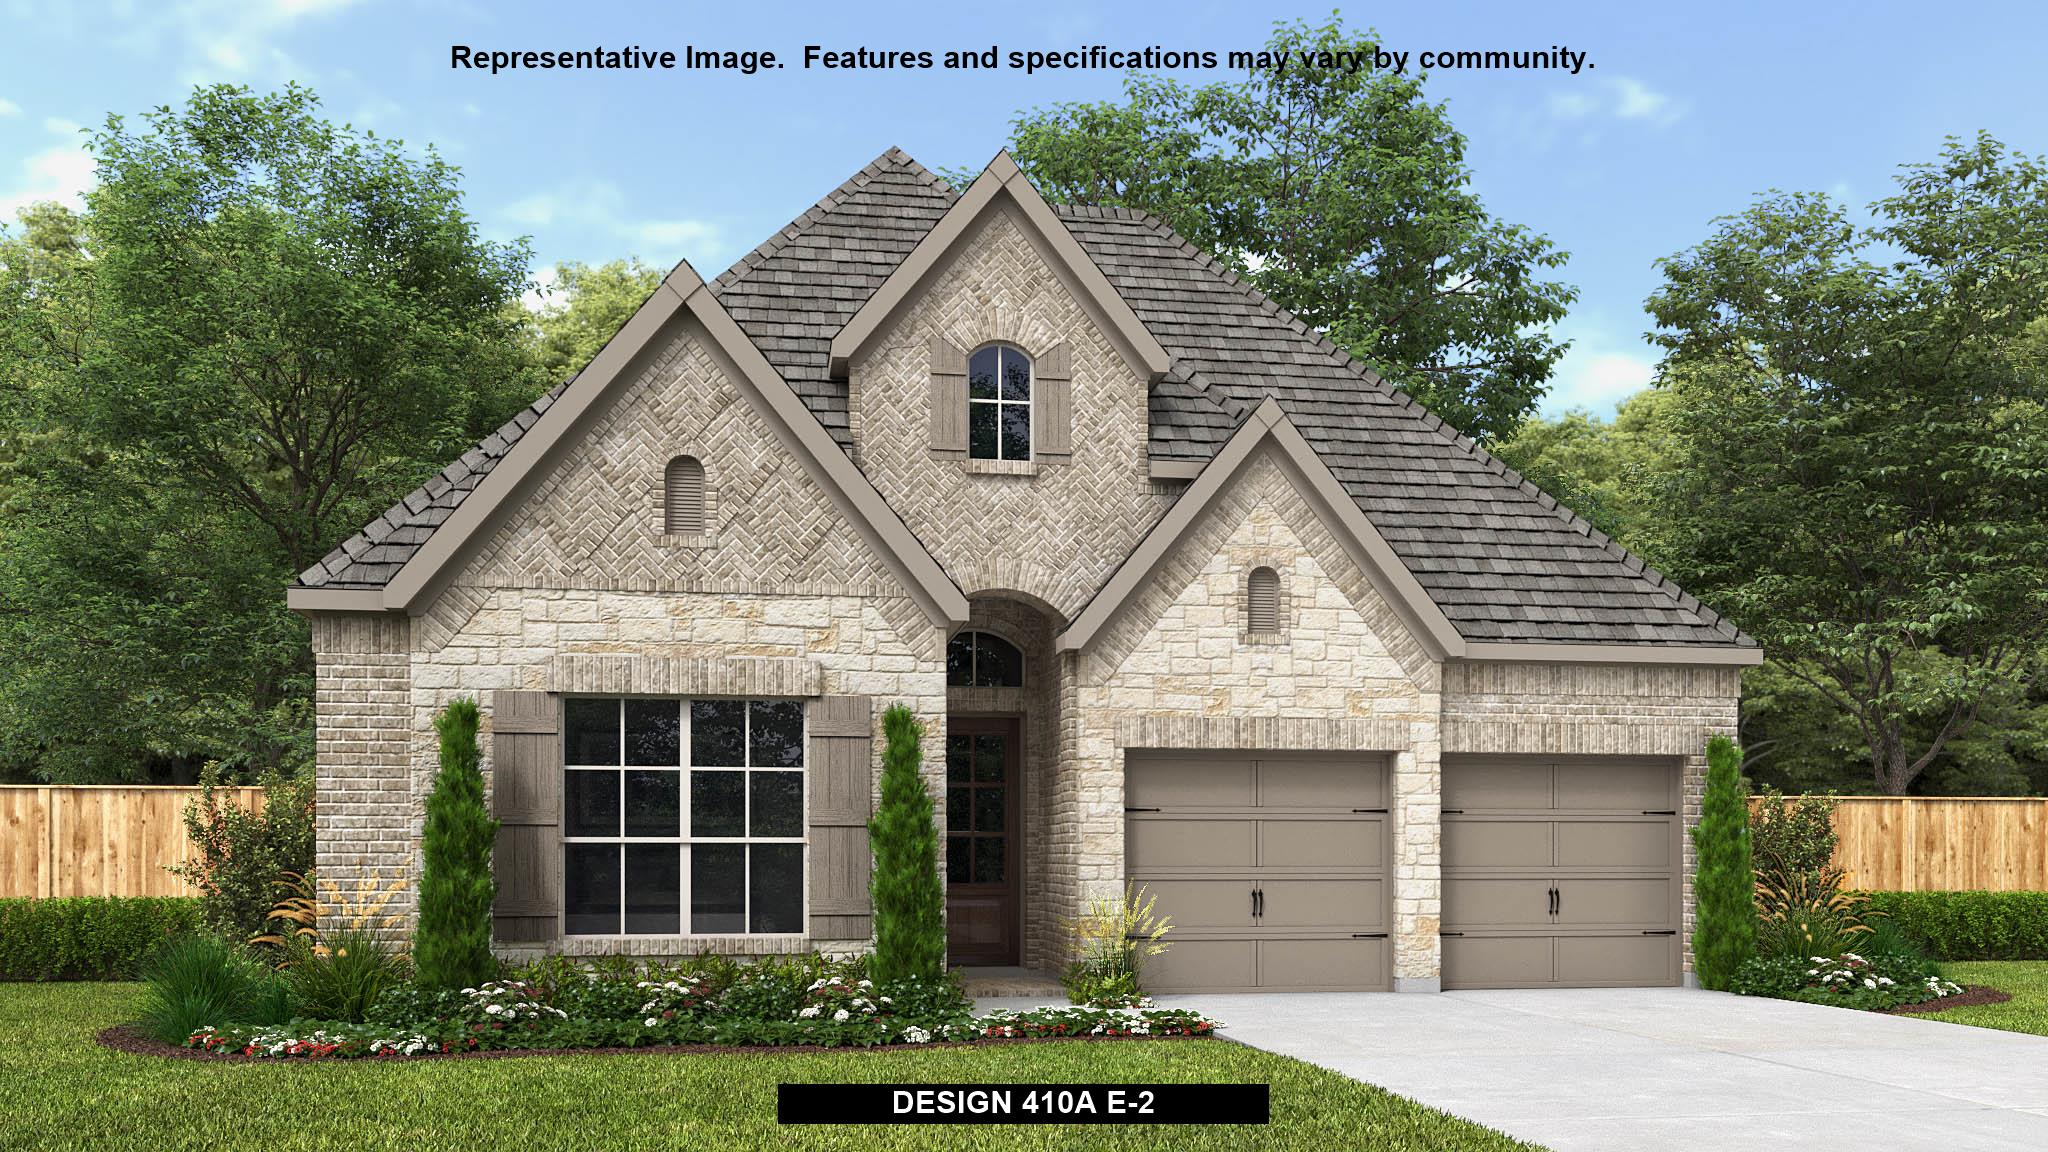 4 Bed/3 Bath Home Plan 410A in The Tribute 50'